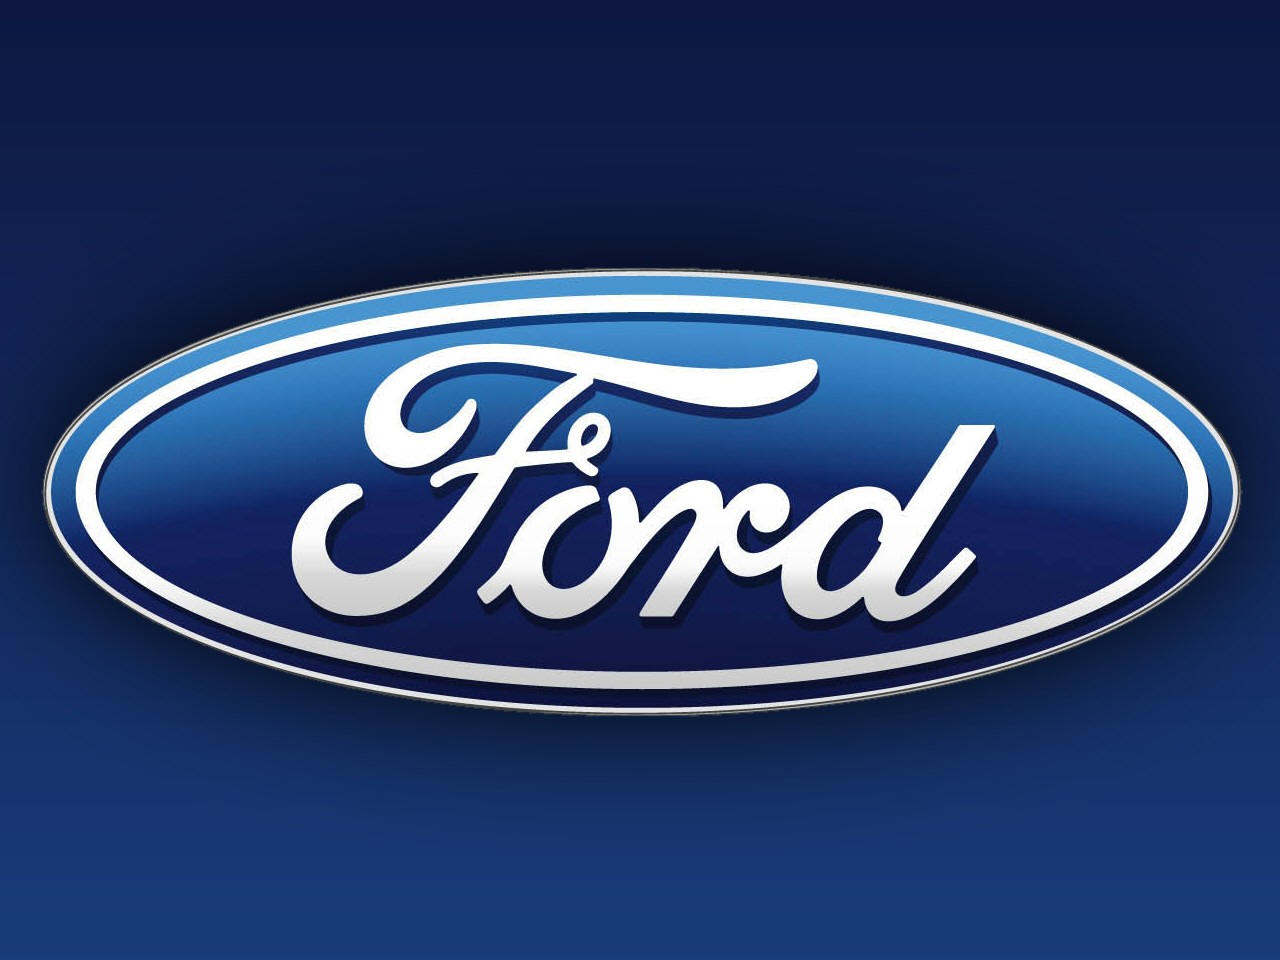 Lower Sales in Europe Cause Ford Second Quarter Profits To Decline